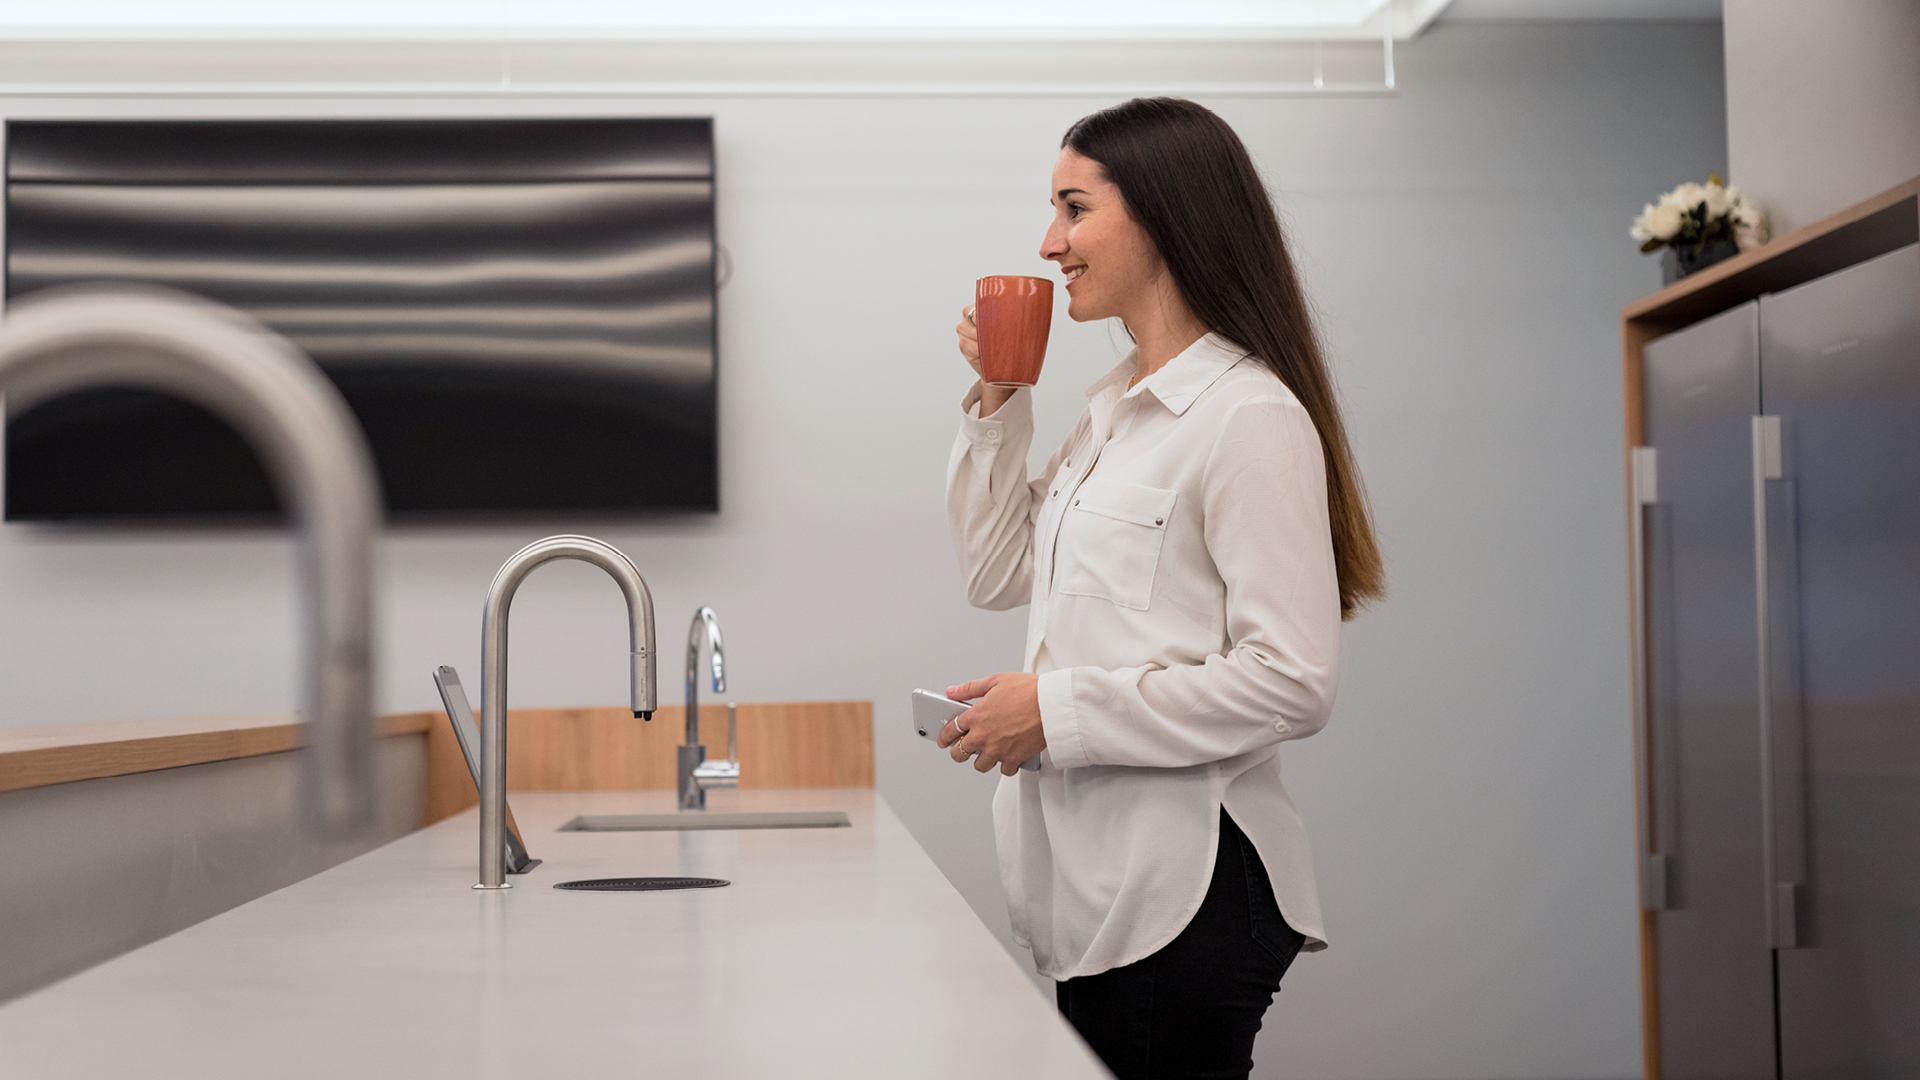 Employee enjoying a coffee served from the TopBrewer coffee machine installed in their work place kitchen